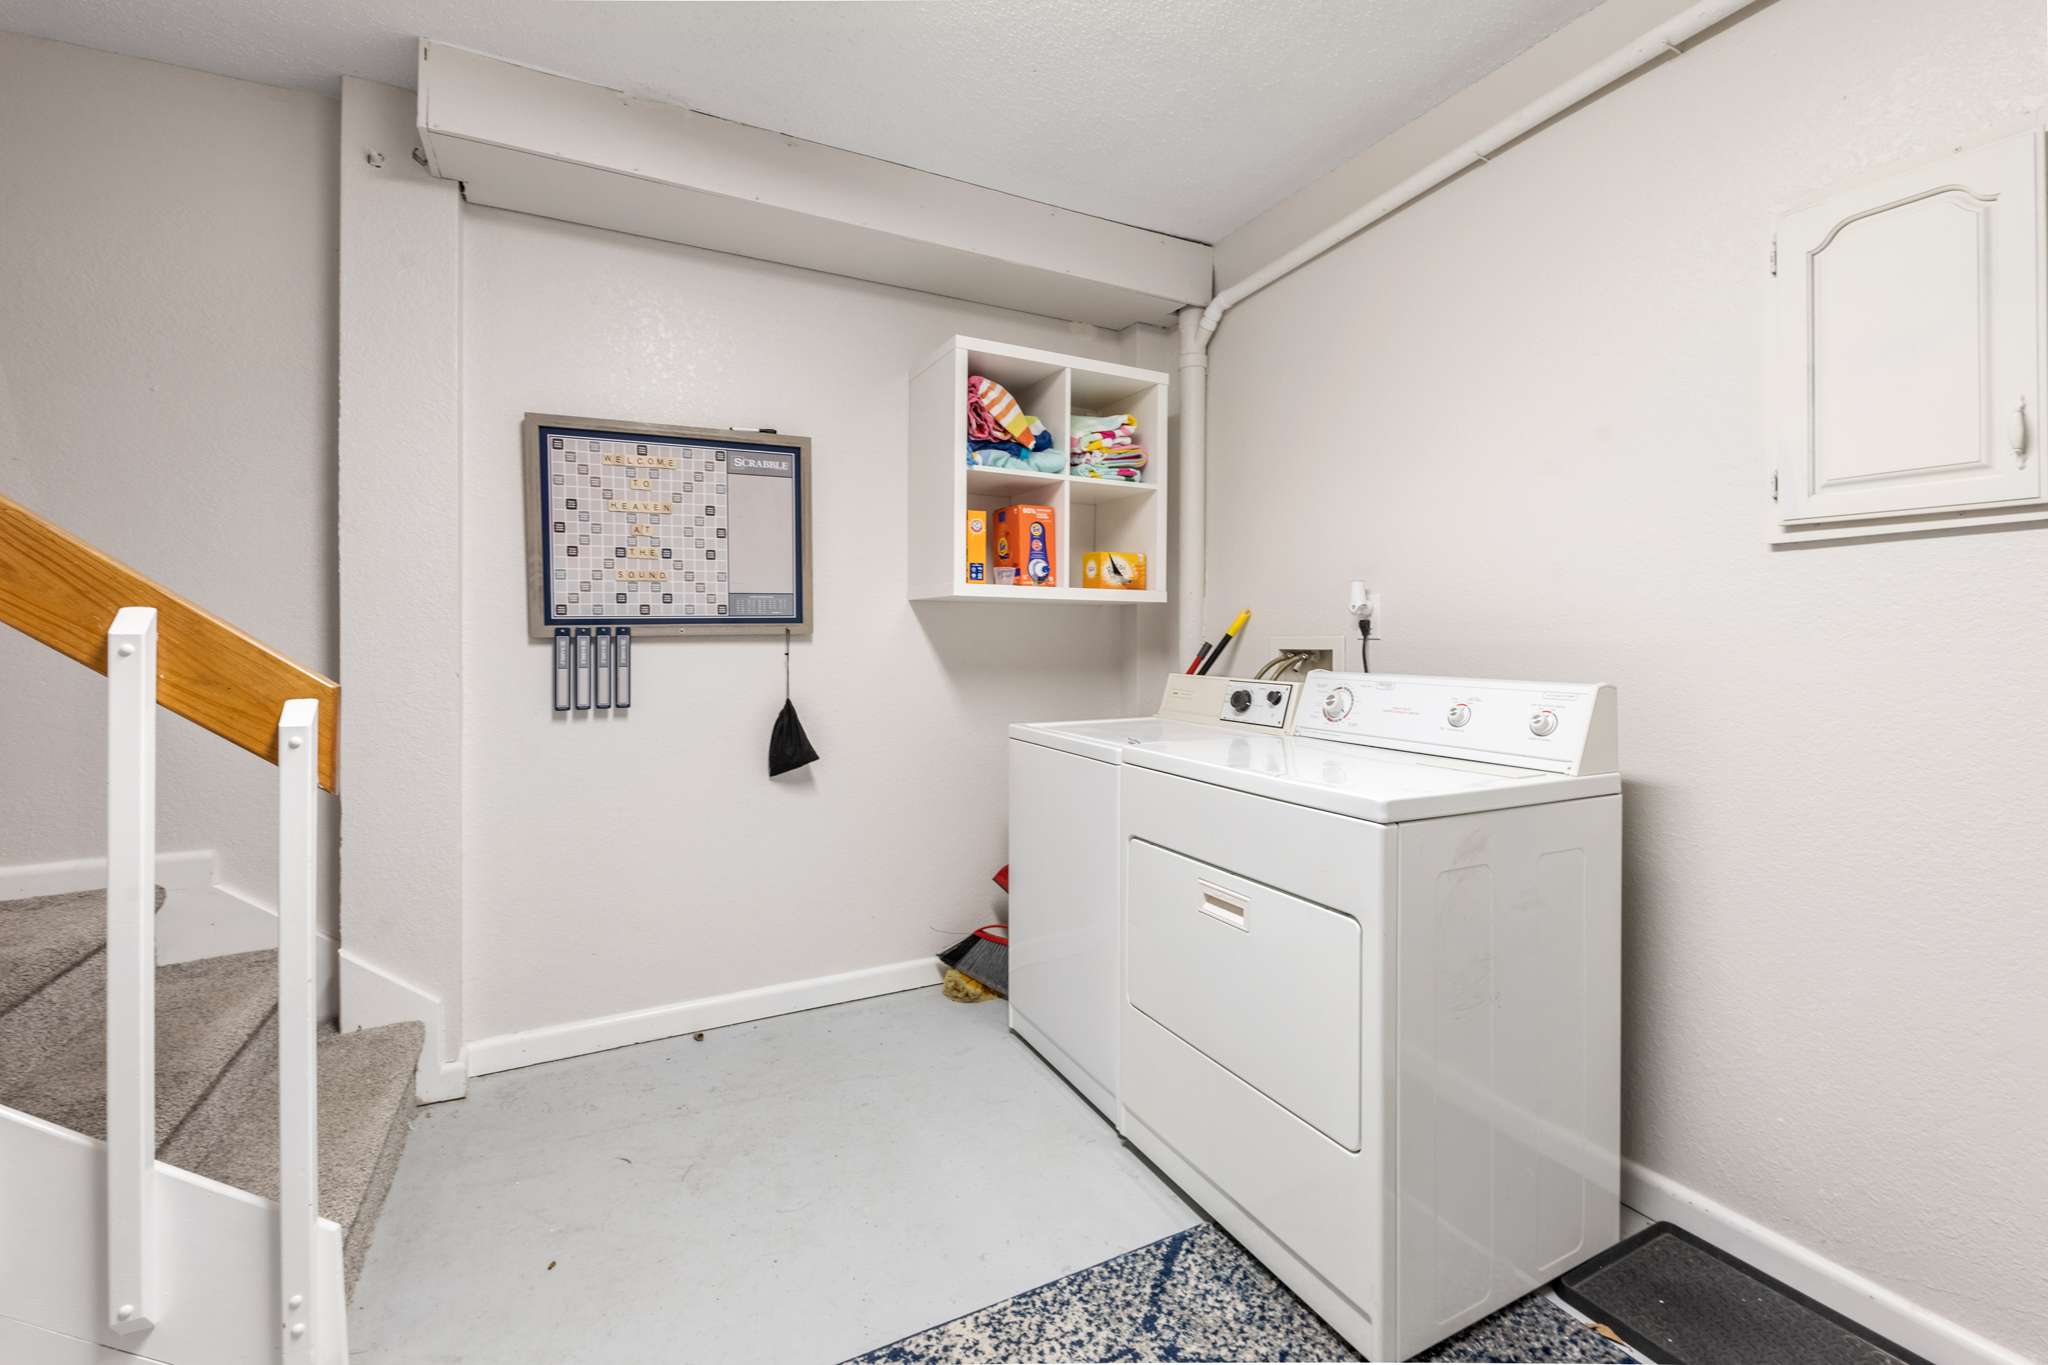 KDN9638: Heaven At The Sound | Ground Level Dry Entry/Laundry Area